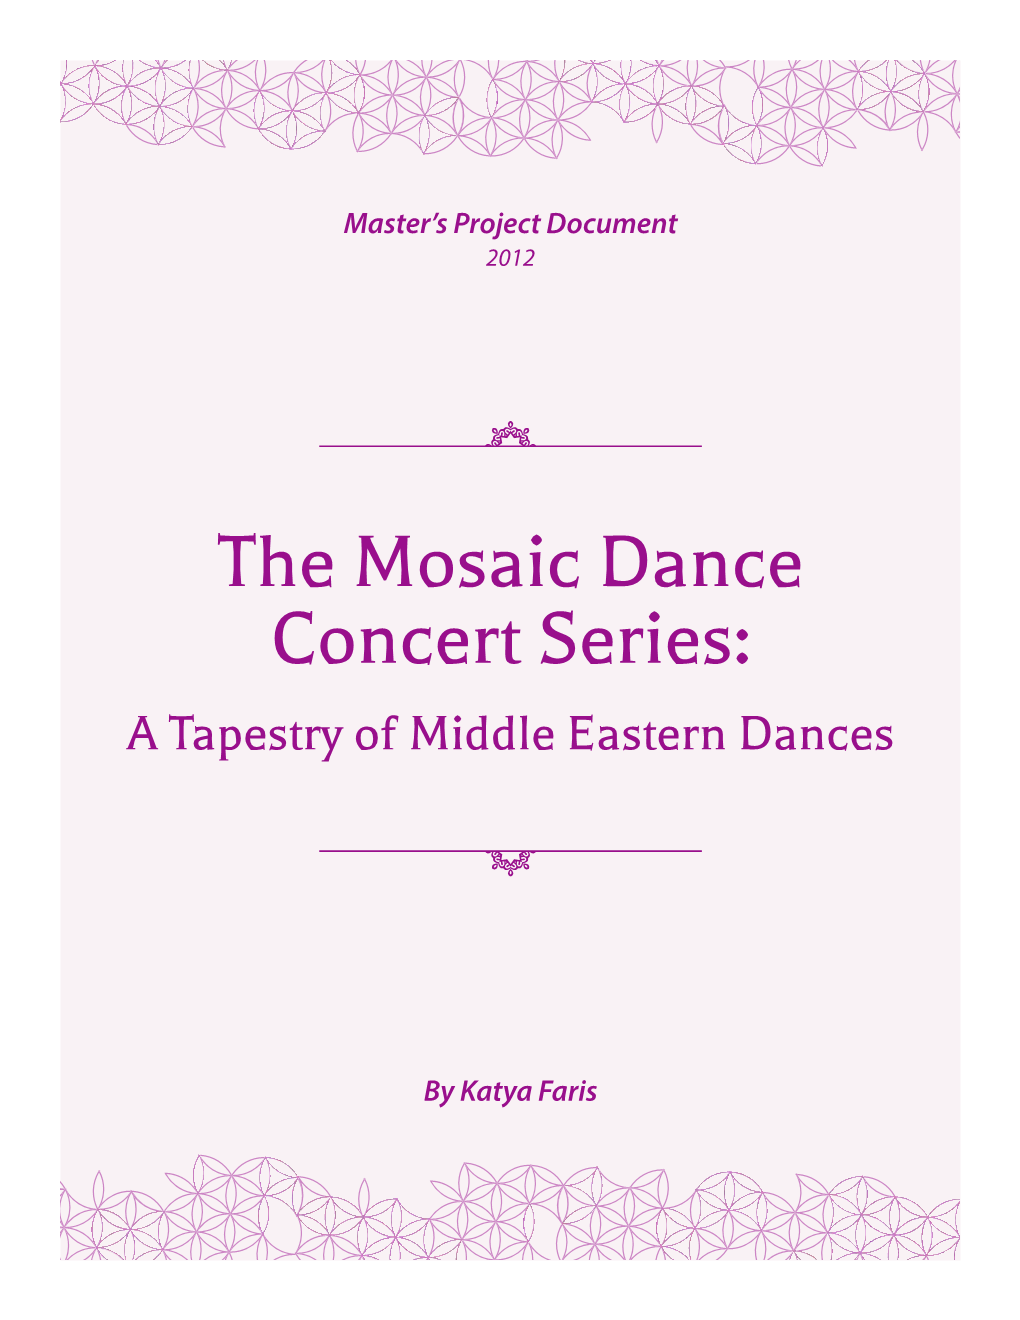 The Mosaic Dance Concert Series: a Tapestry of Middle Eastern Dances